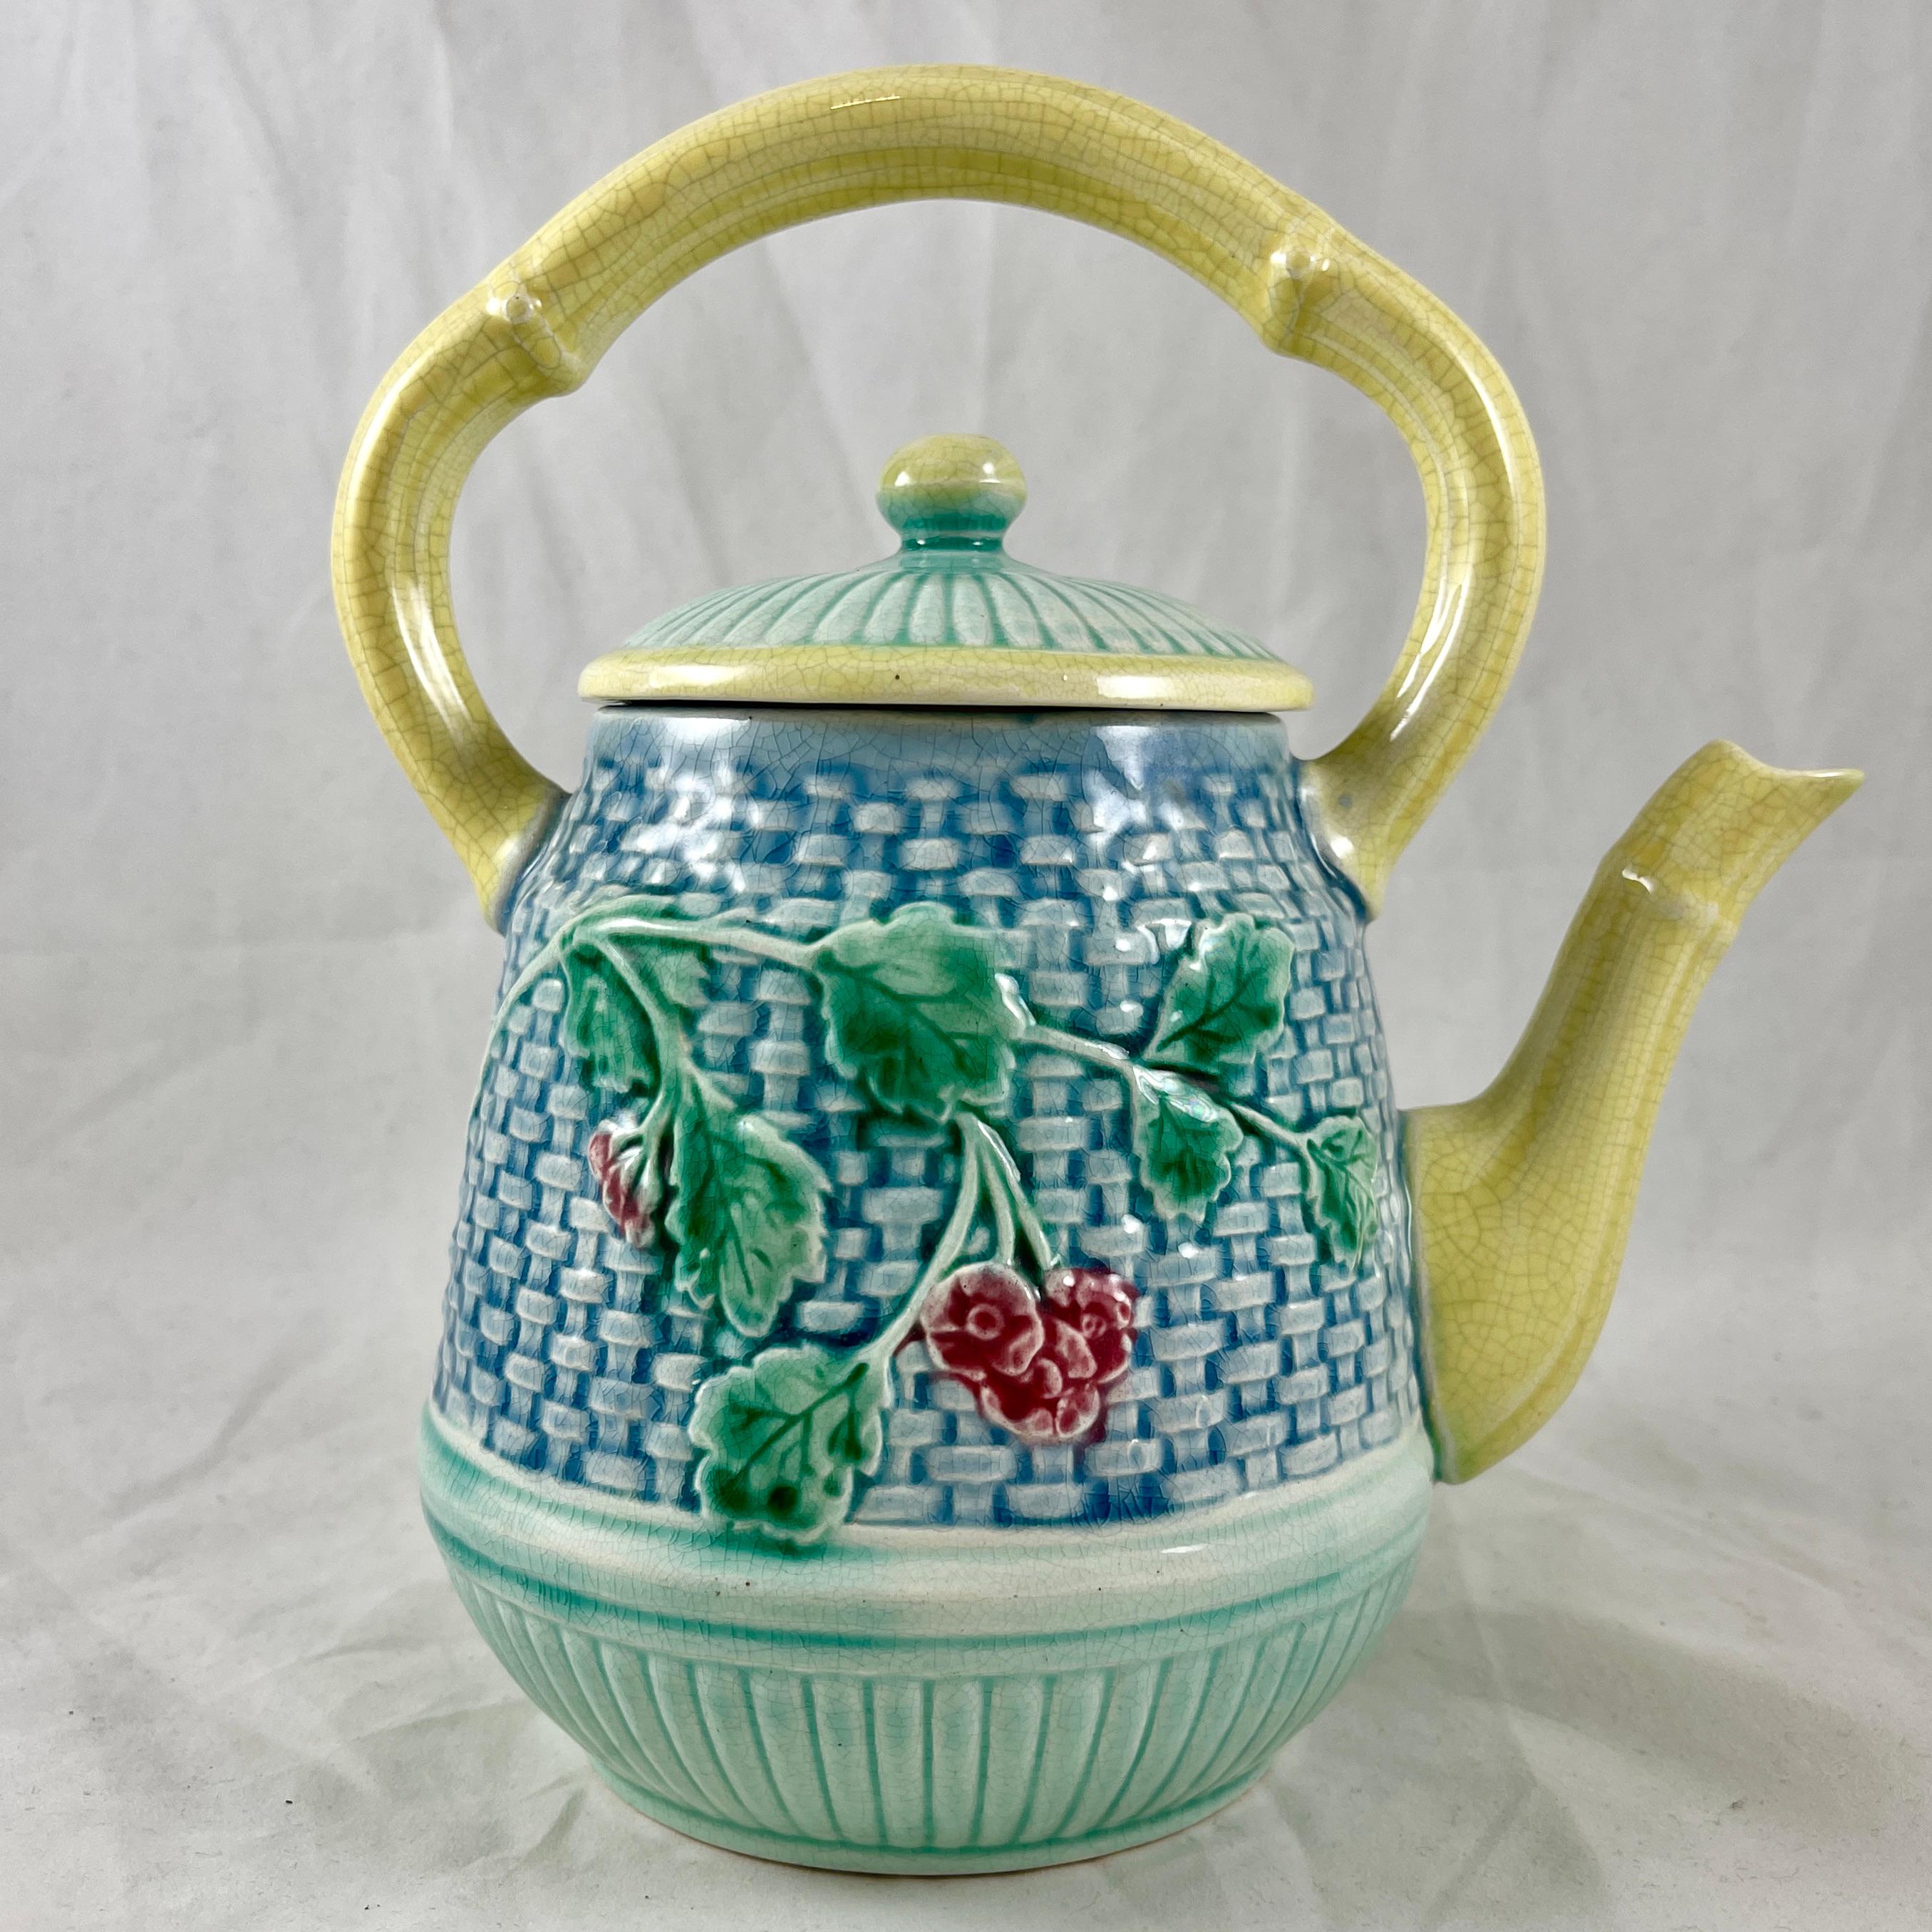 Glazed 19th Century English Majolica Basketweave and Floral Tea Kettle